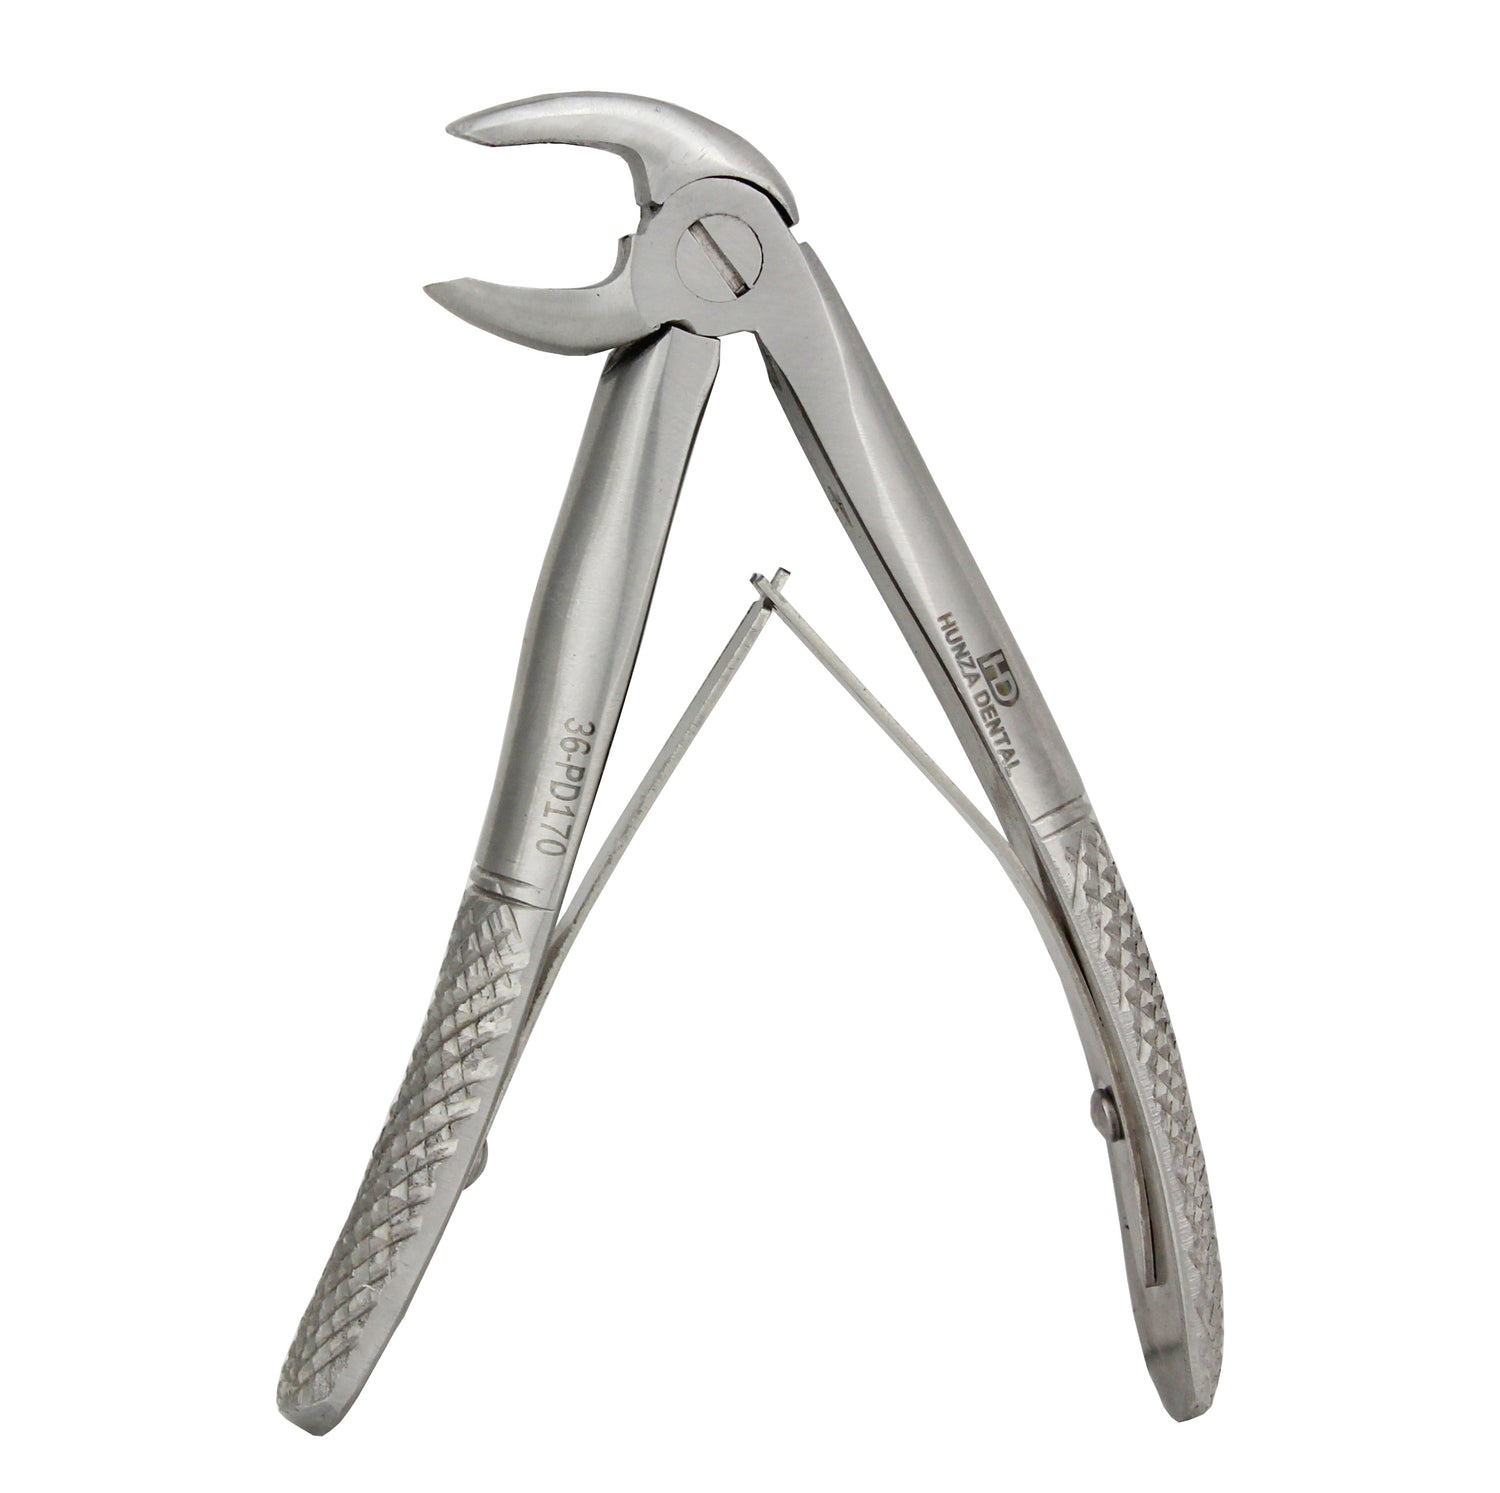 Extraction Forceps PD170, Pediatric